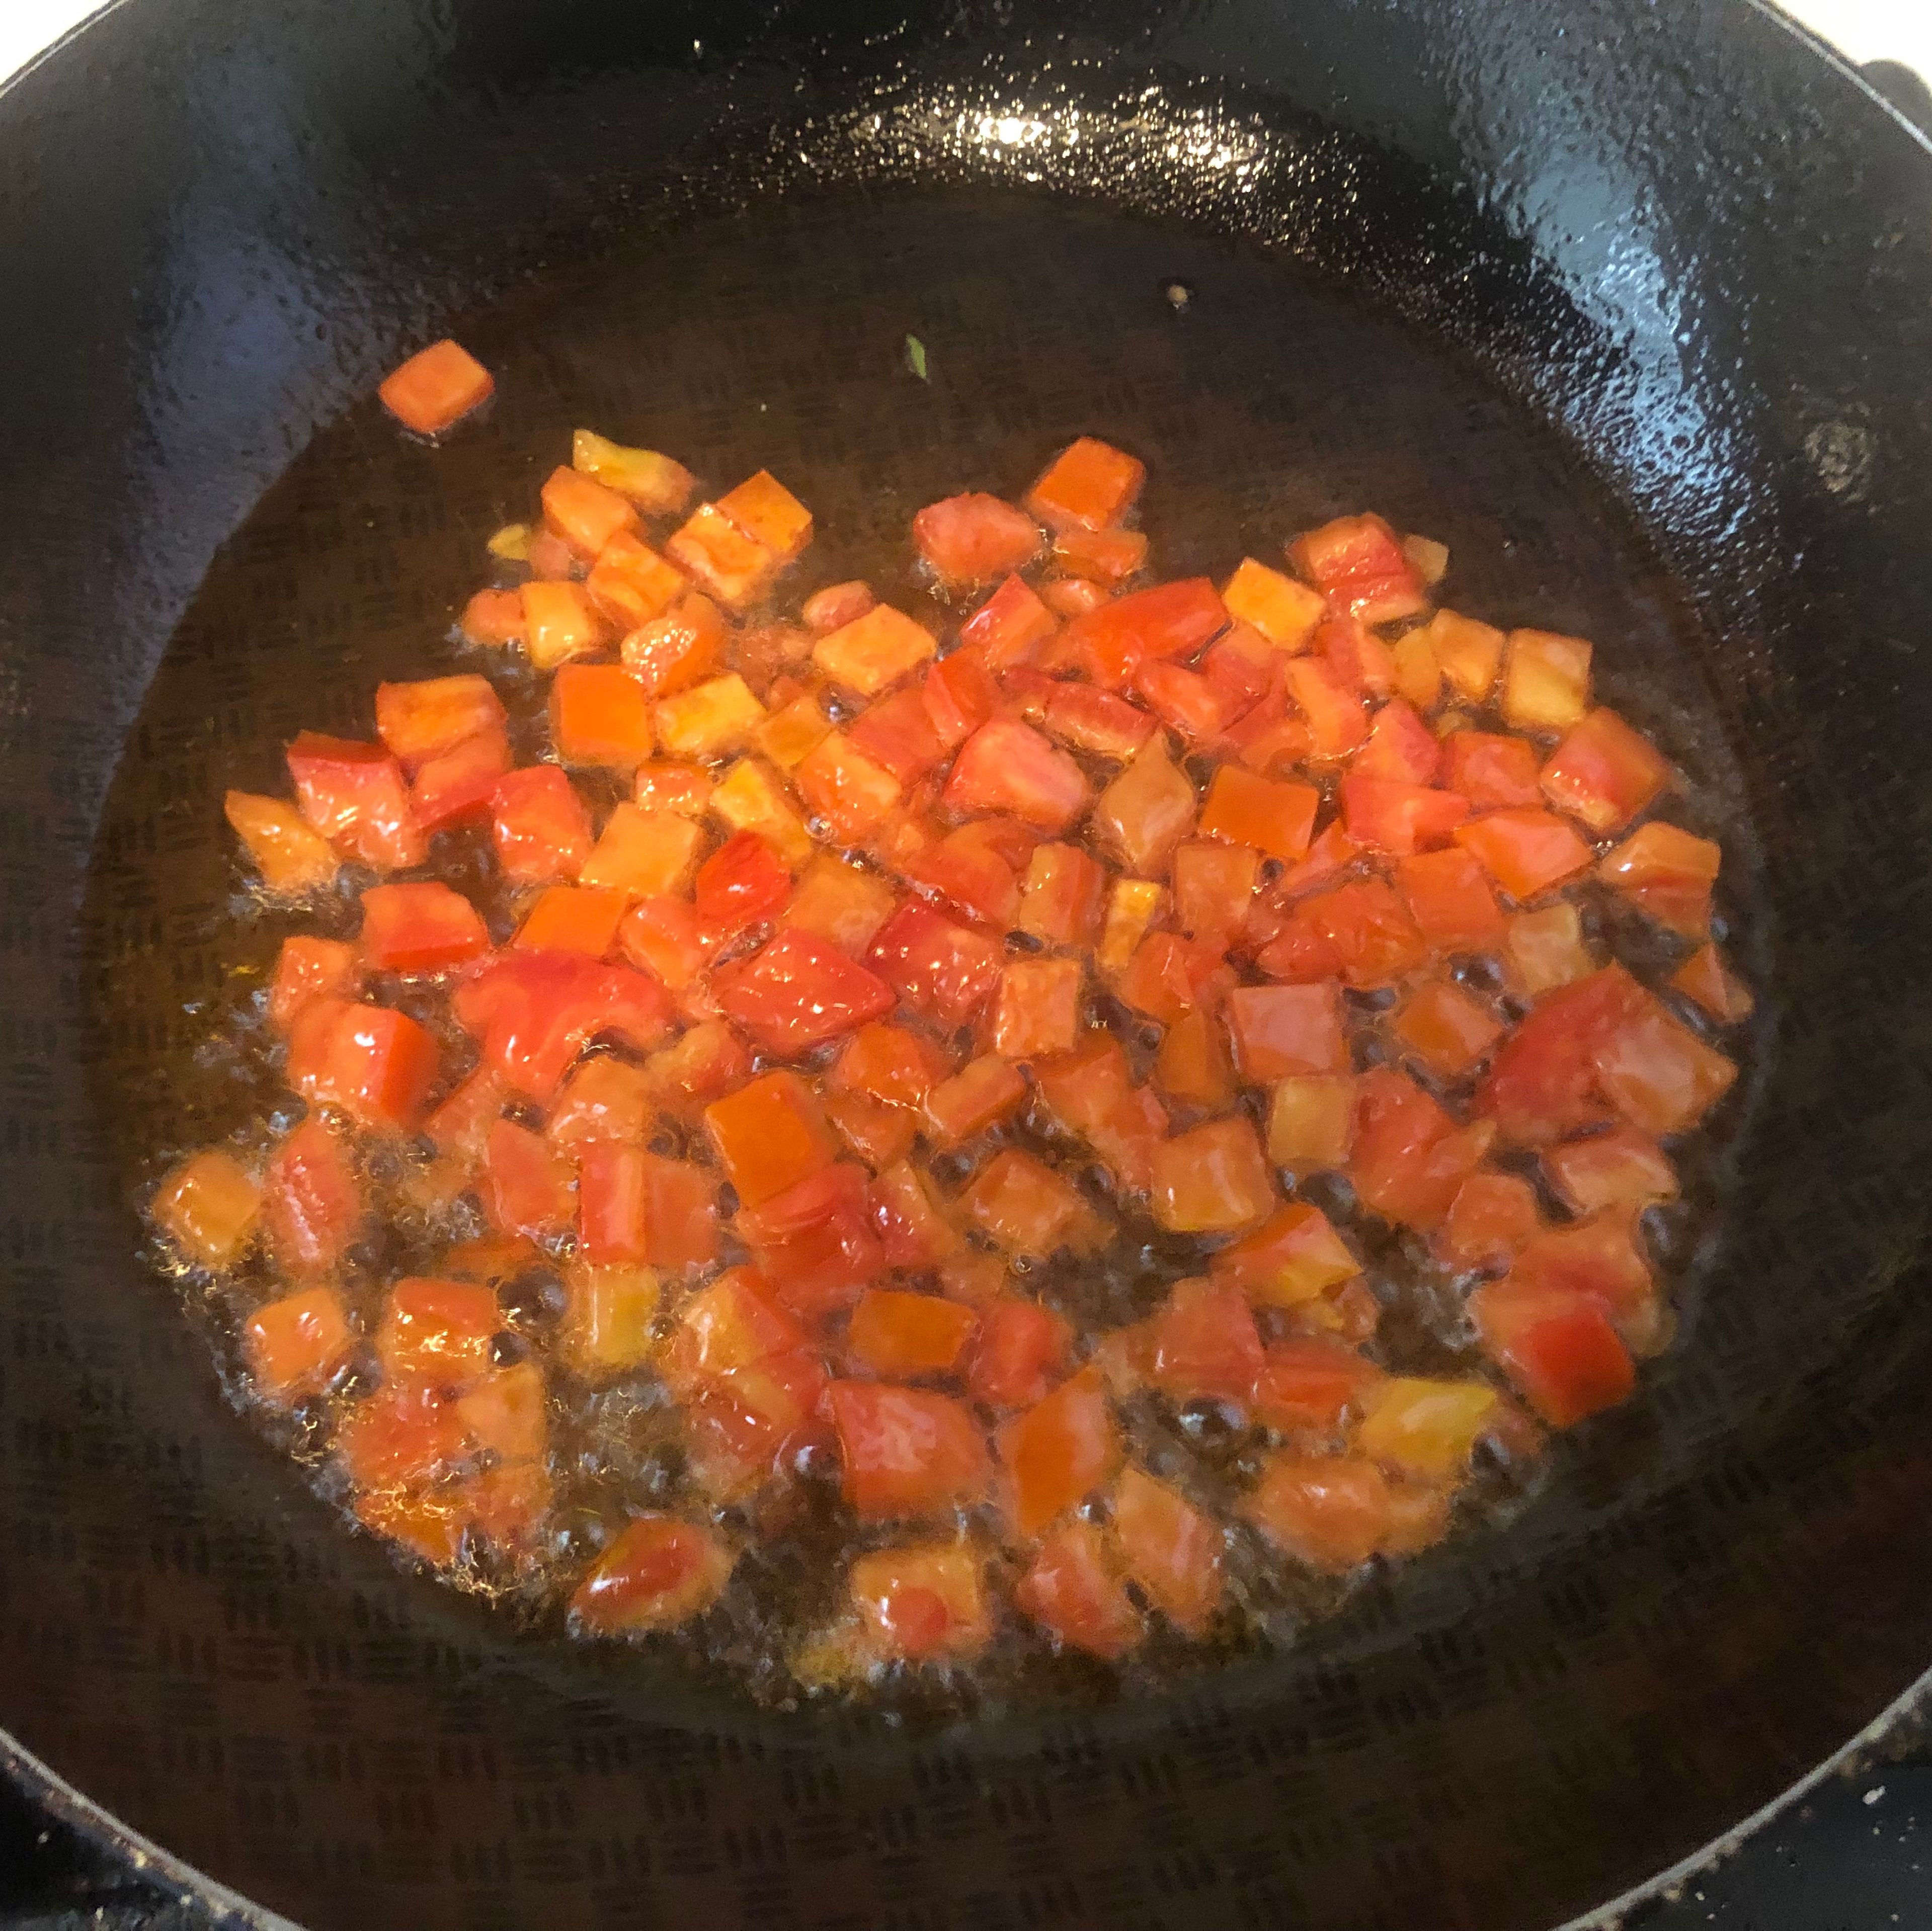 Heat the oil and sauté the tomato and the red bell pepper